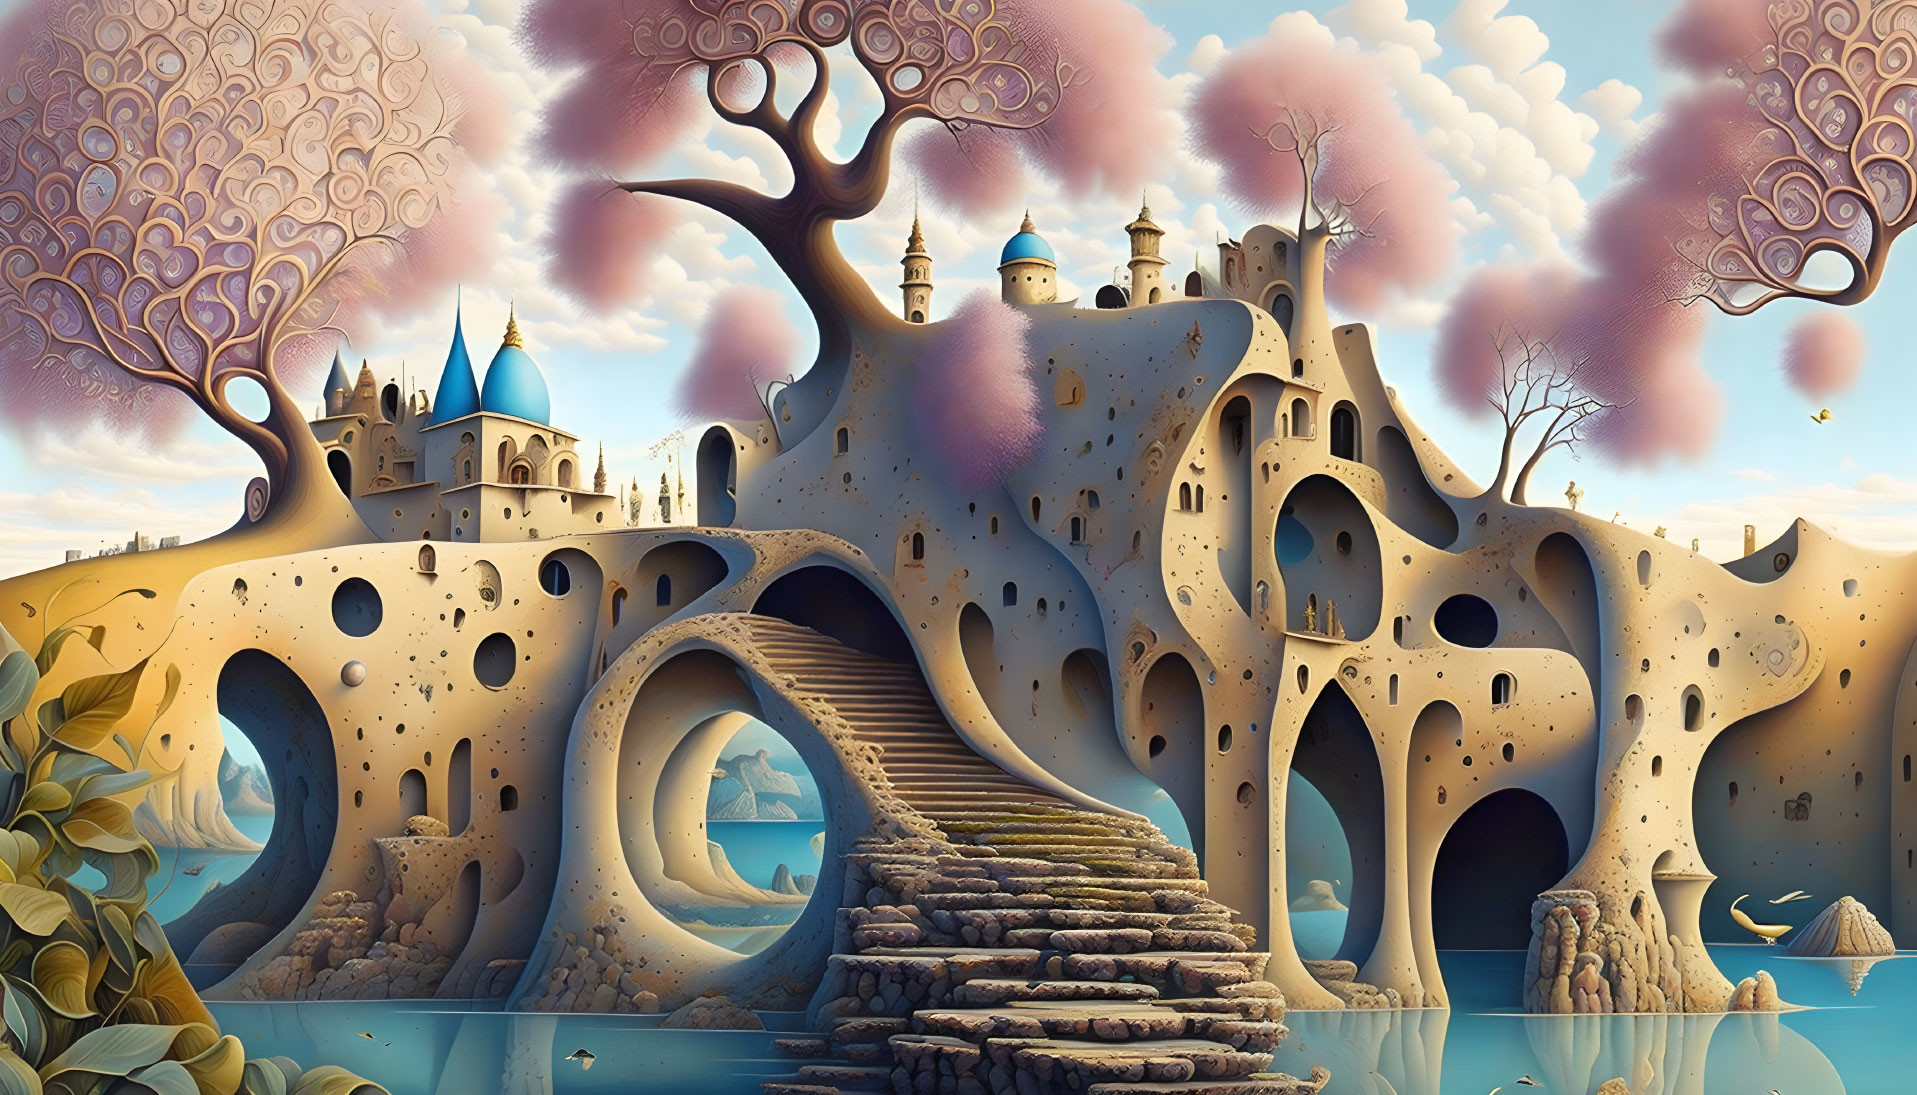 Whimsical fantasy landscape with castle, arched bridge, and balloons